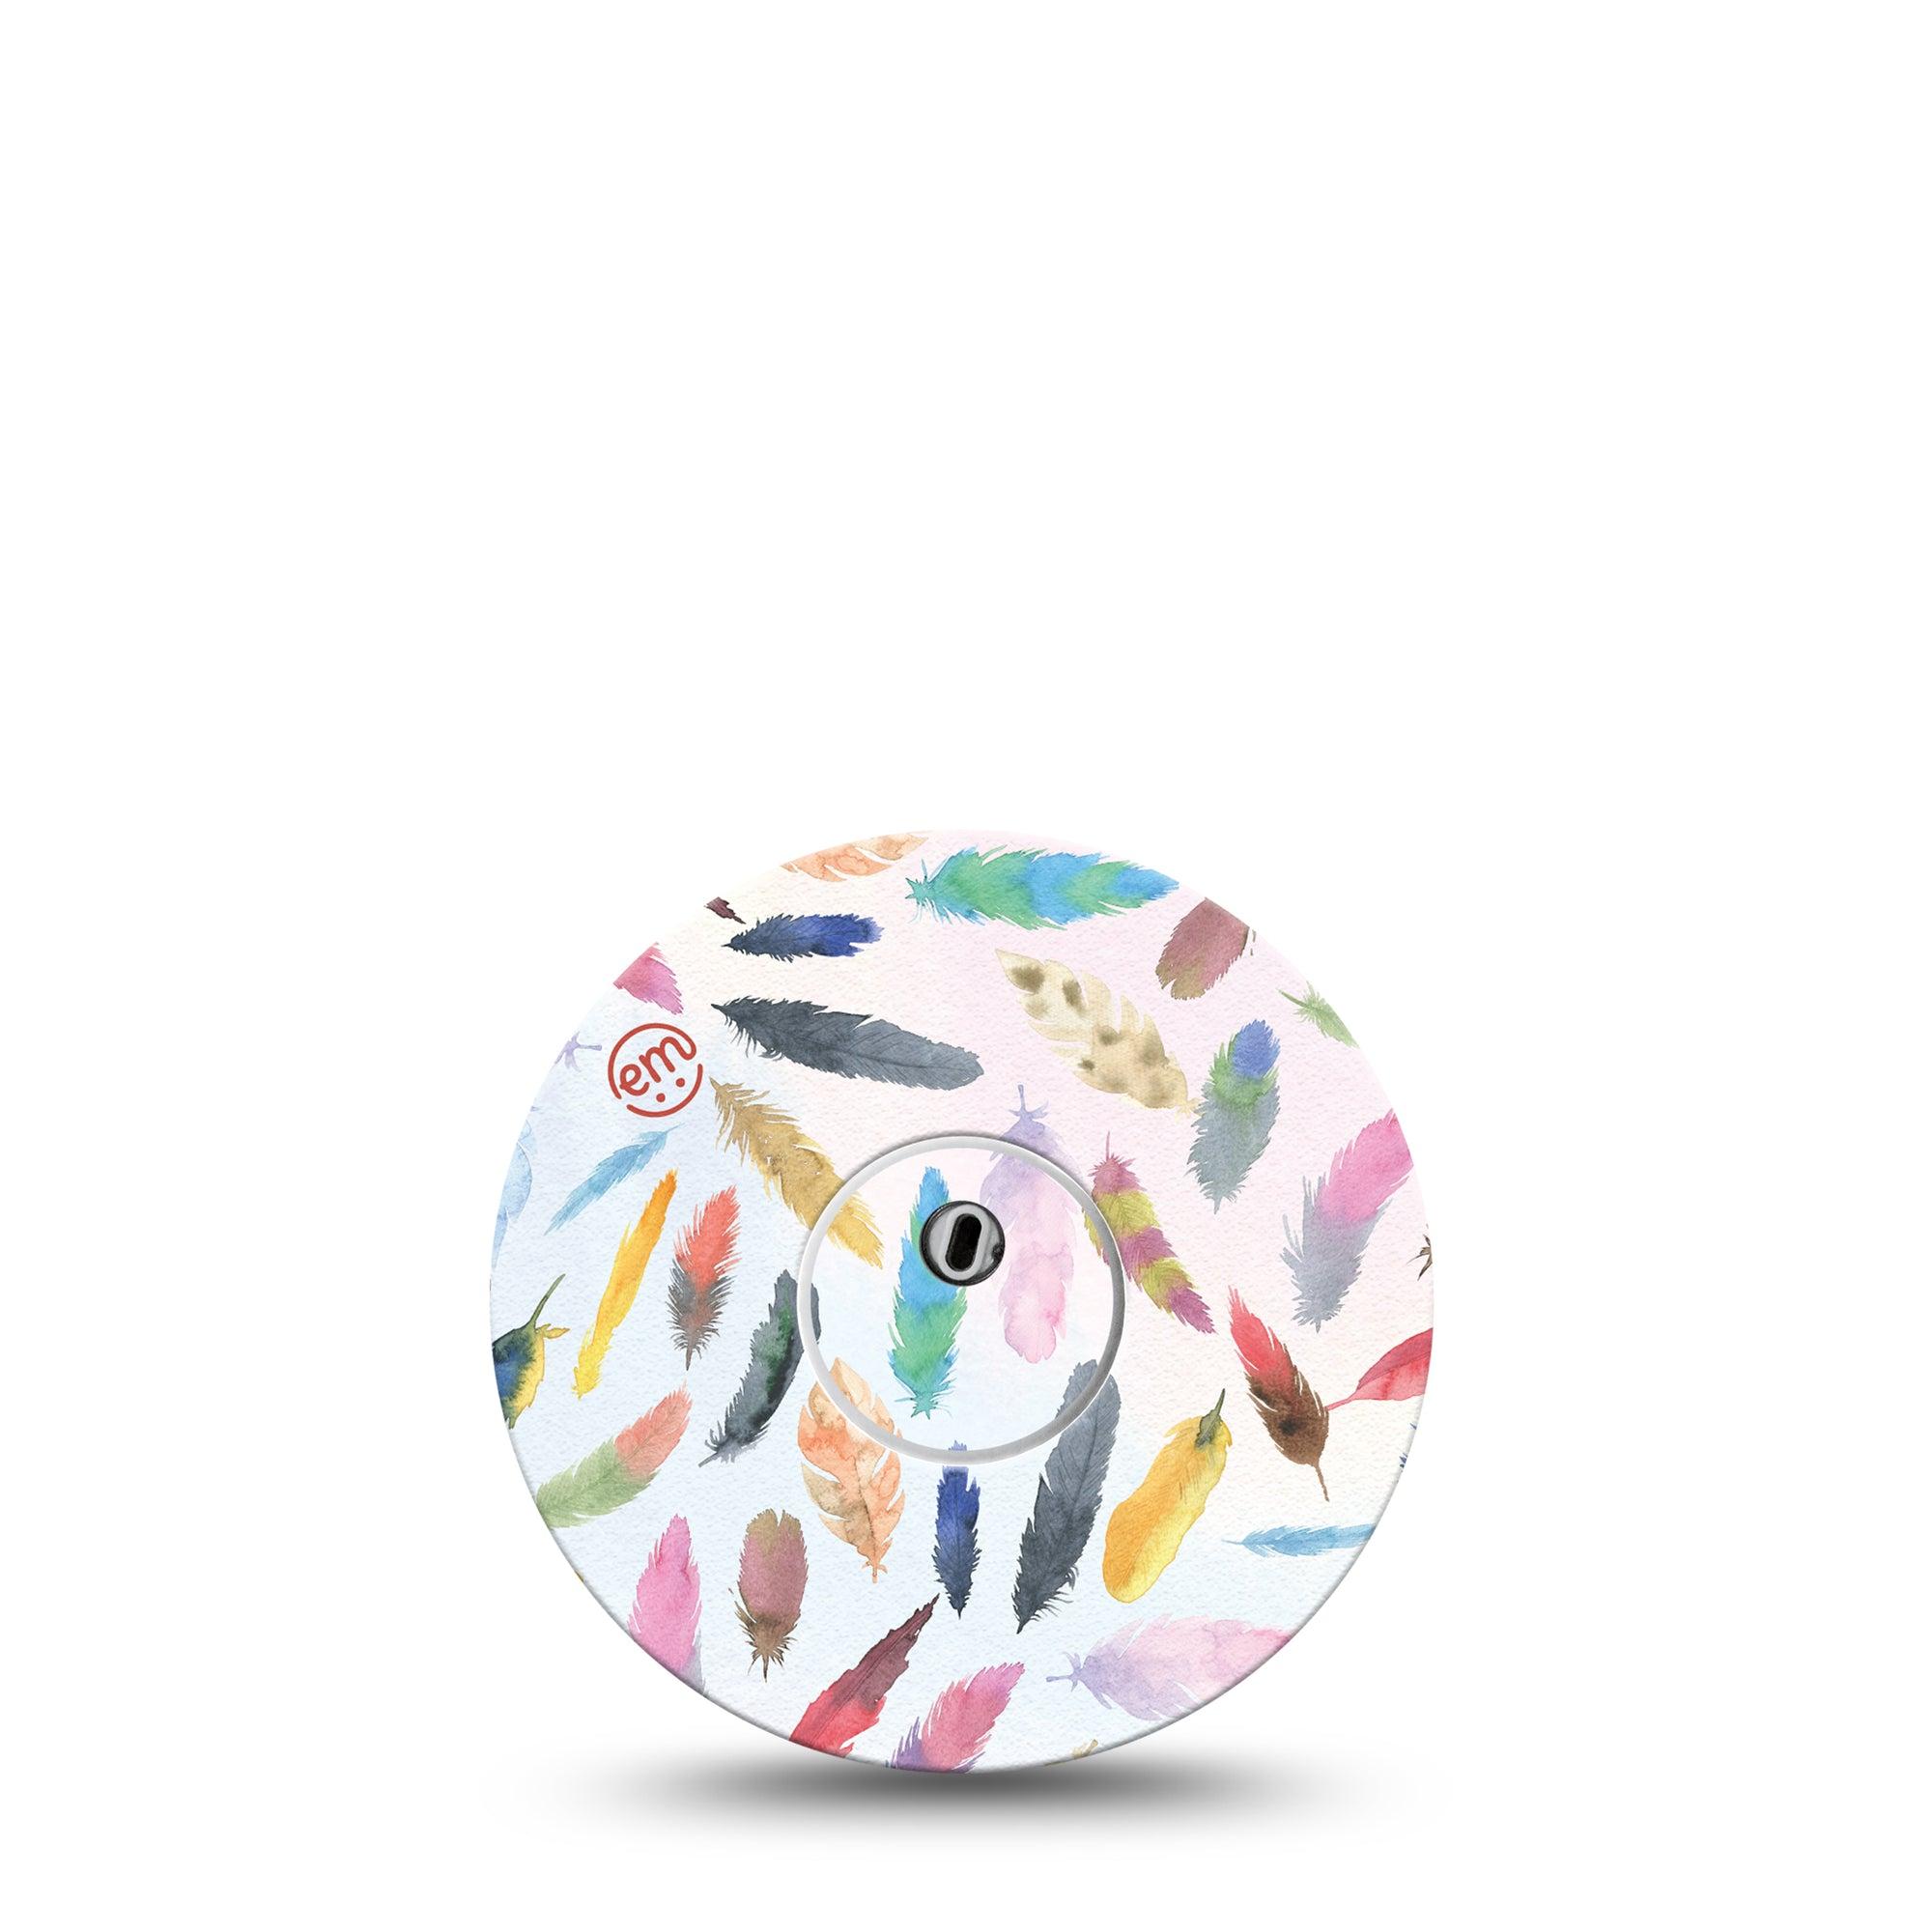 ExpressionMed Libre 3 Transmitter Sticker Soft Colorful Feather Themed Design, Tape and Sticker